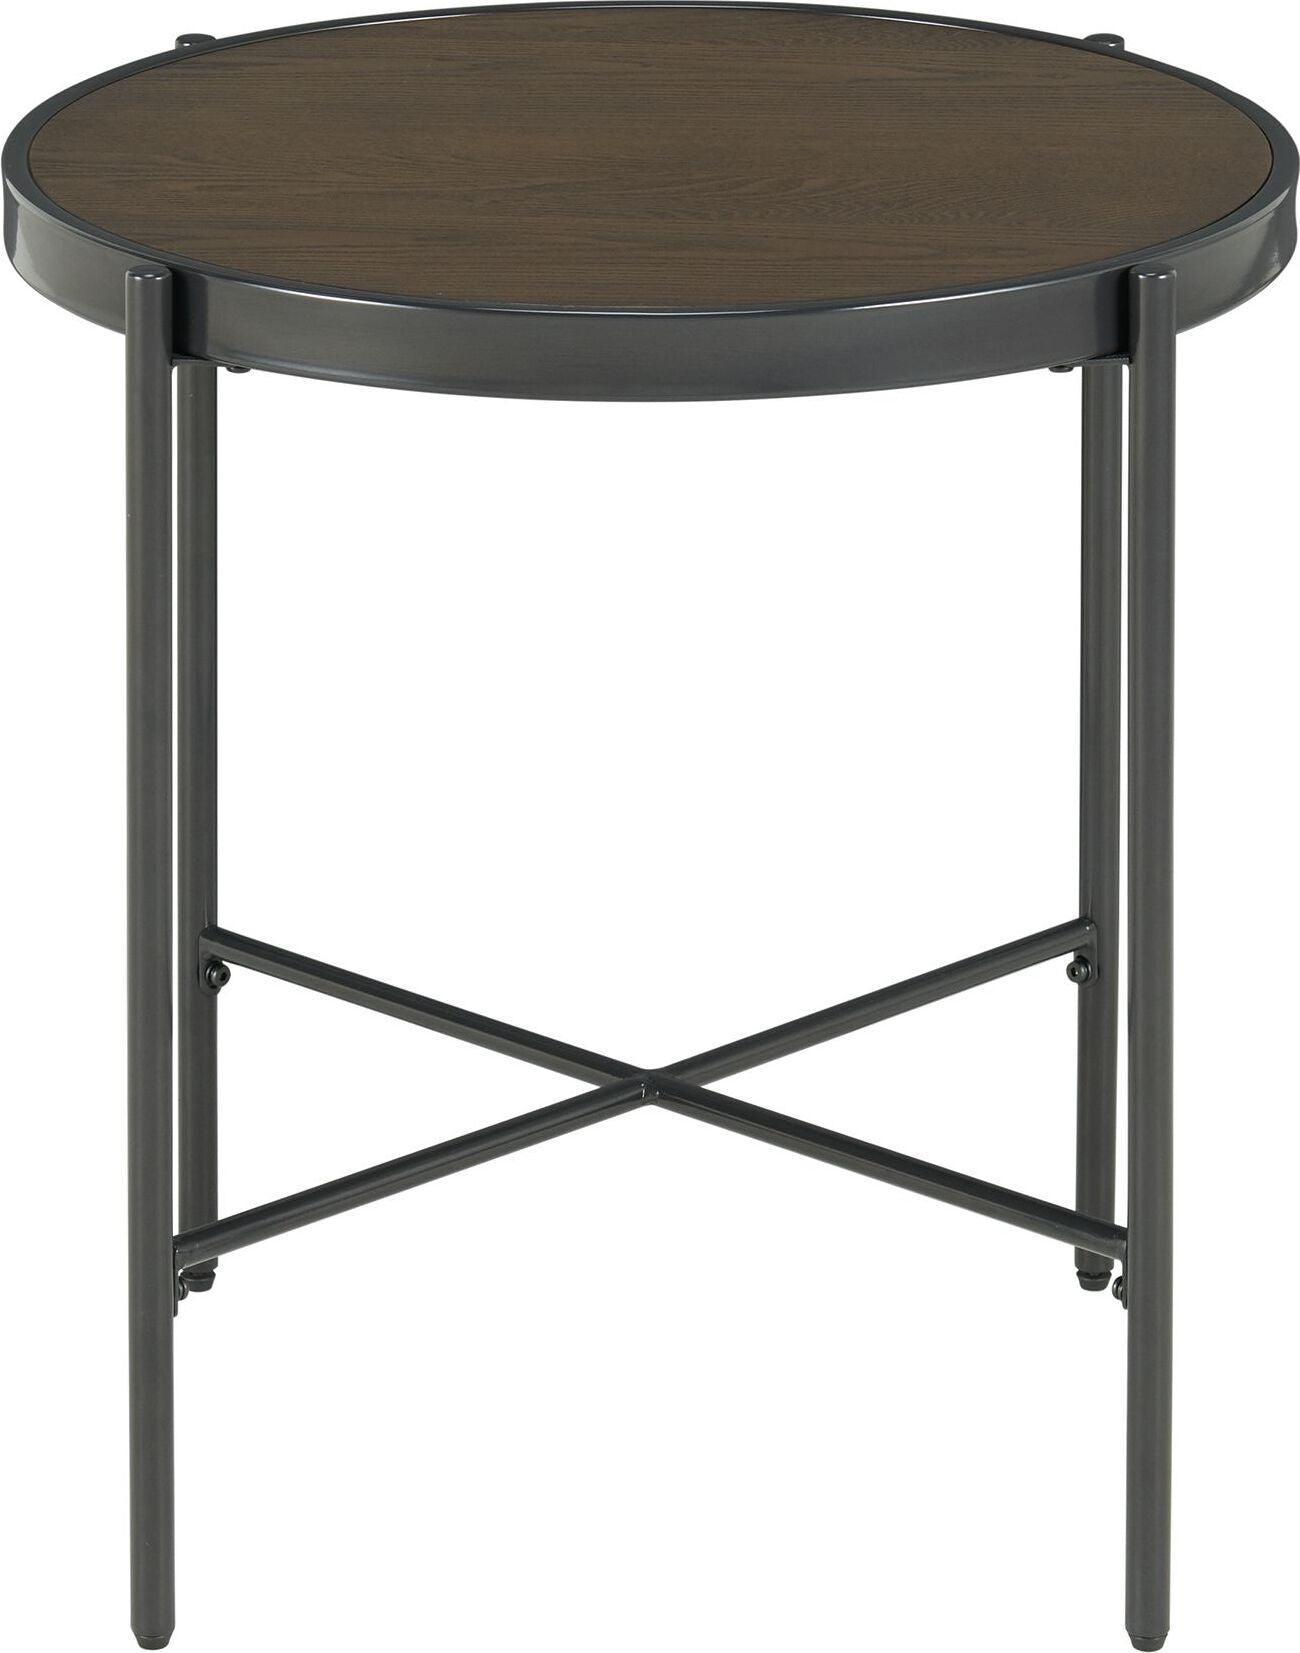 Elements Side & End Tables - Carlo End Table Brown/Black